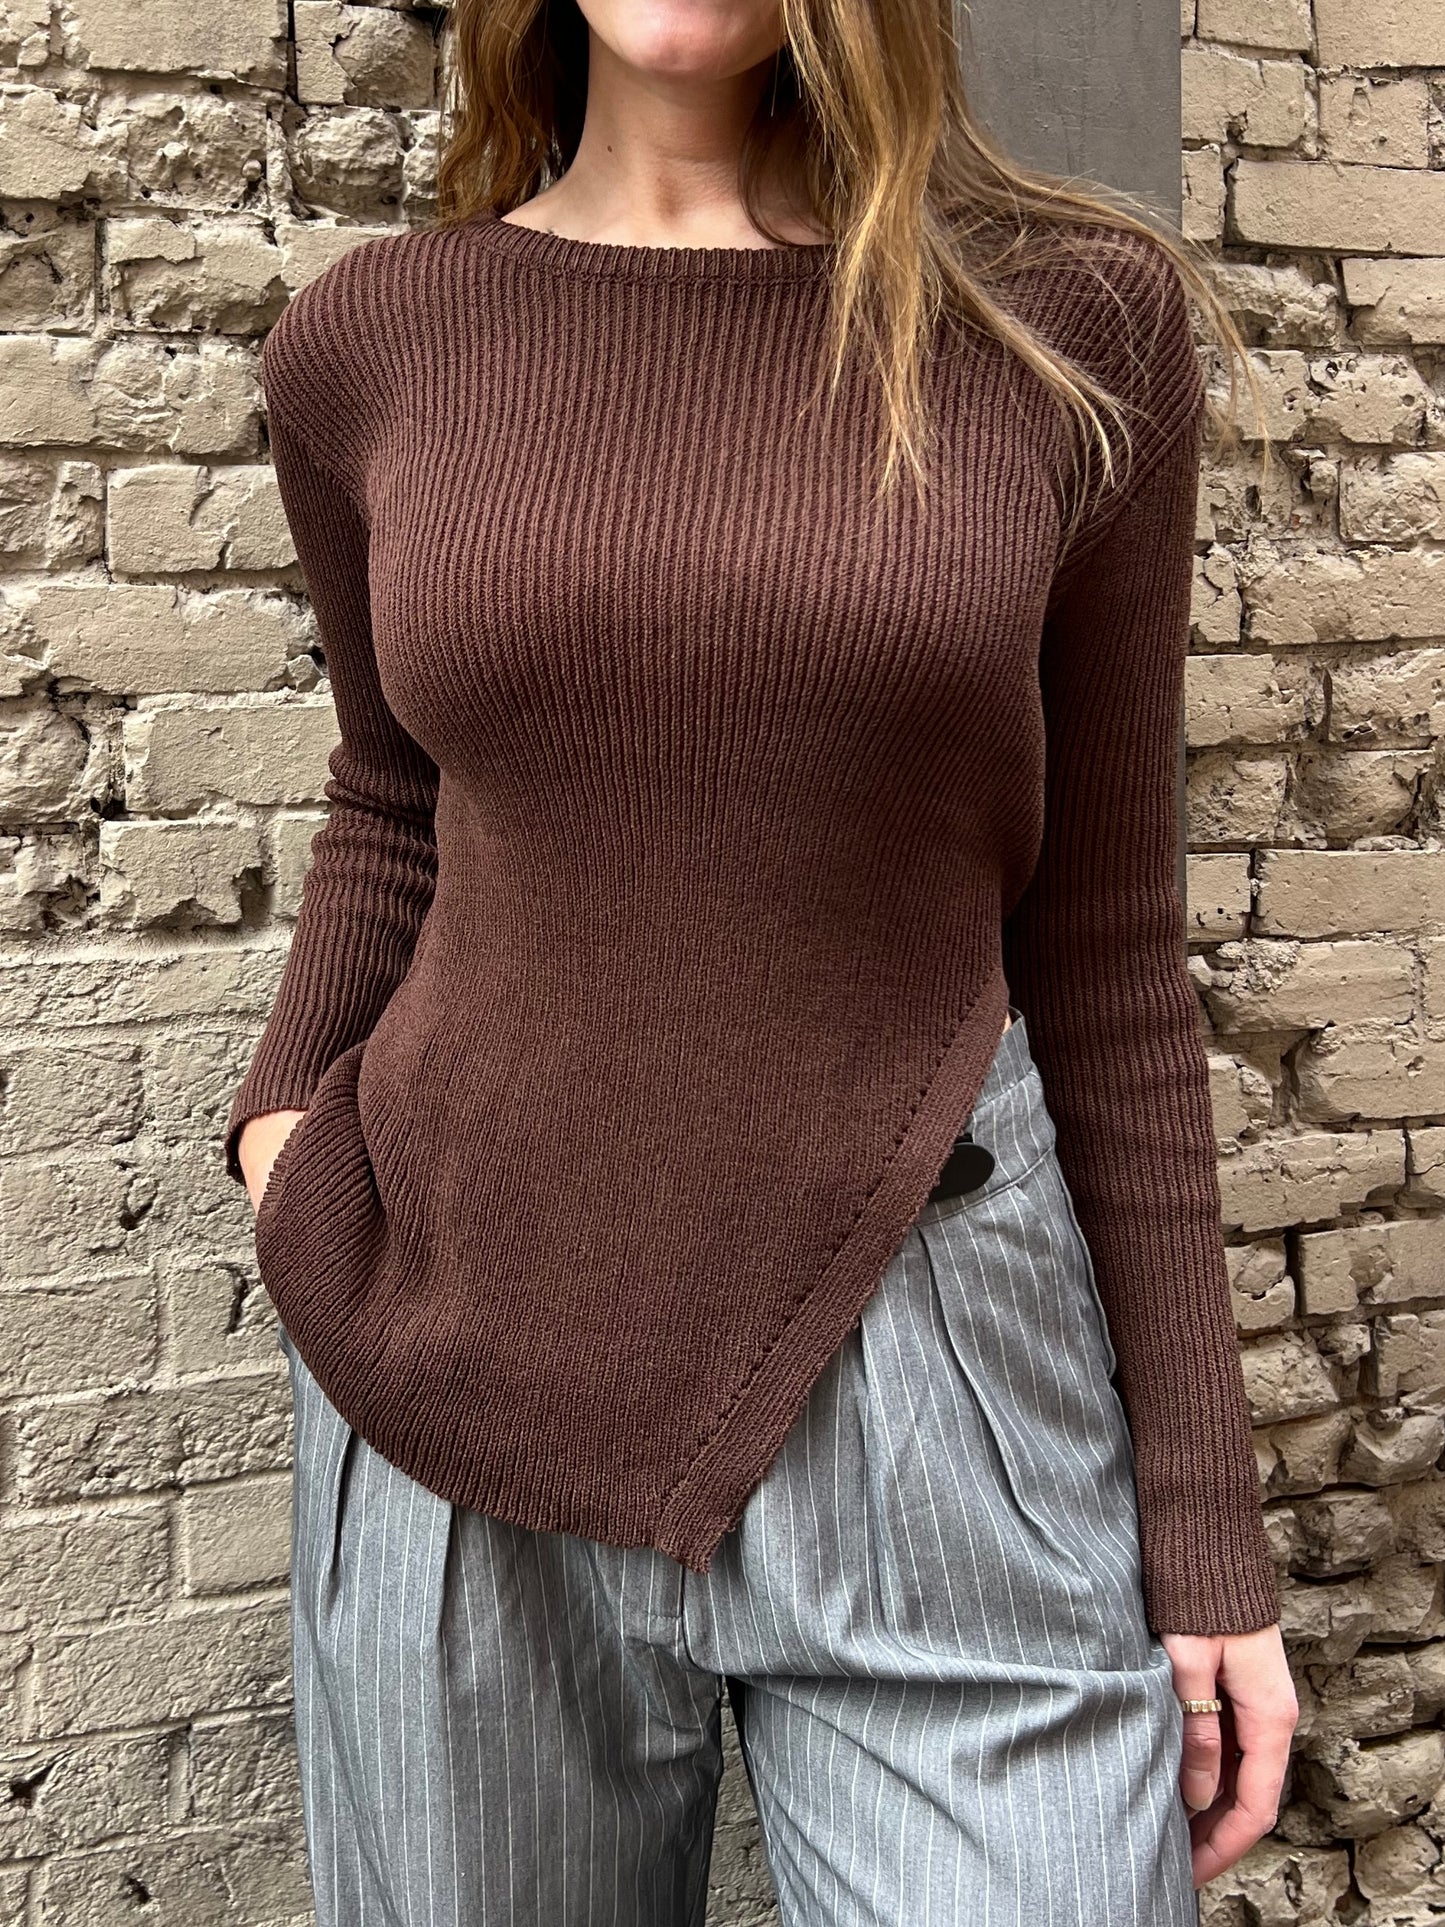 cocoa brown long sleeve sweater with side split hem